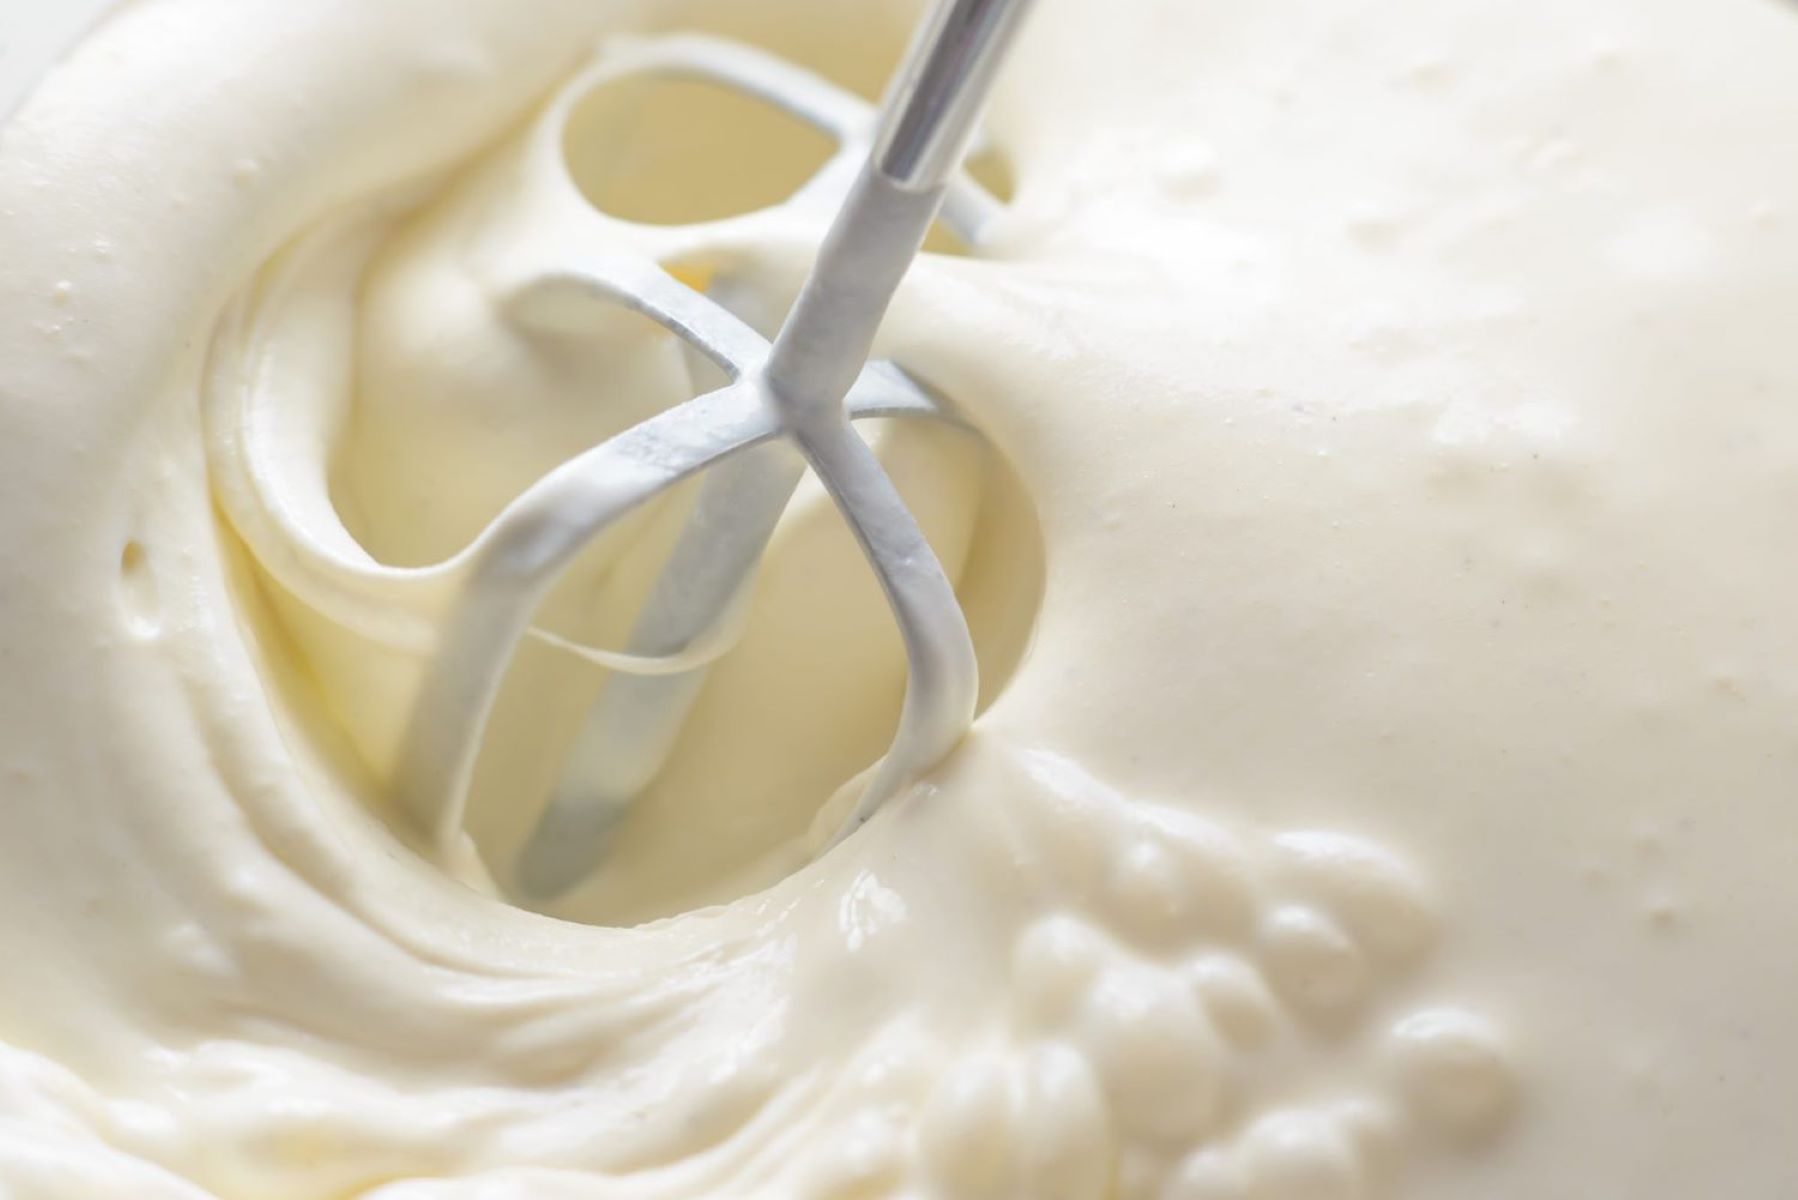 Discover The Surprising Truth: Cool Whip Vs. Real Whipped Cream – Which Is Healthier?